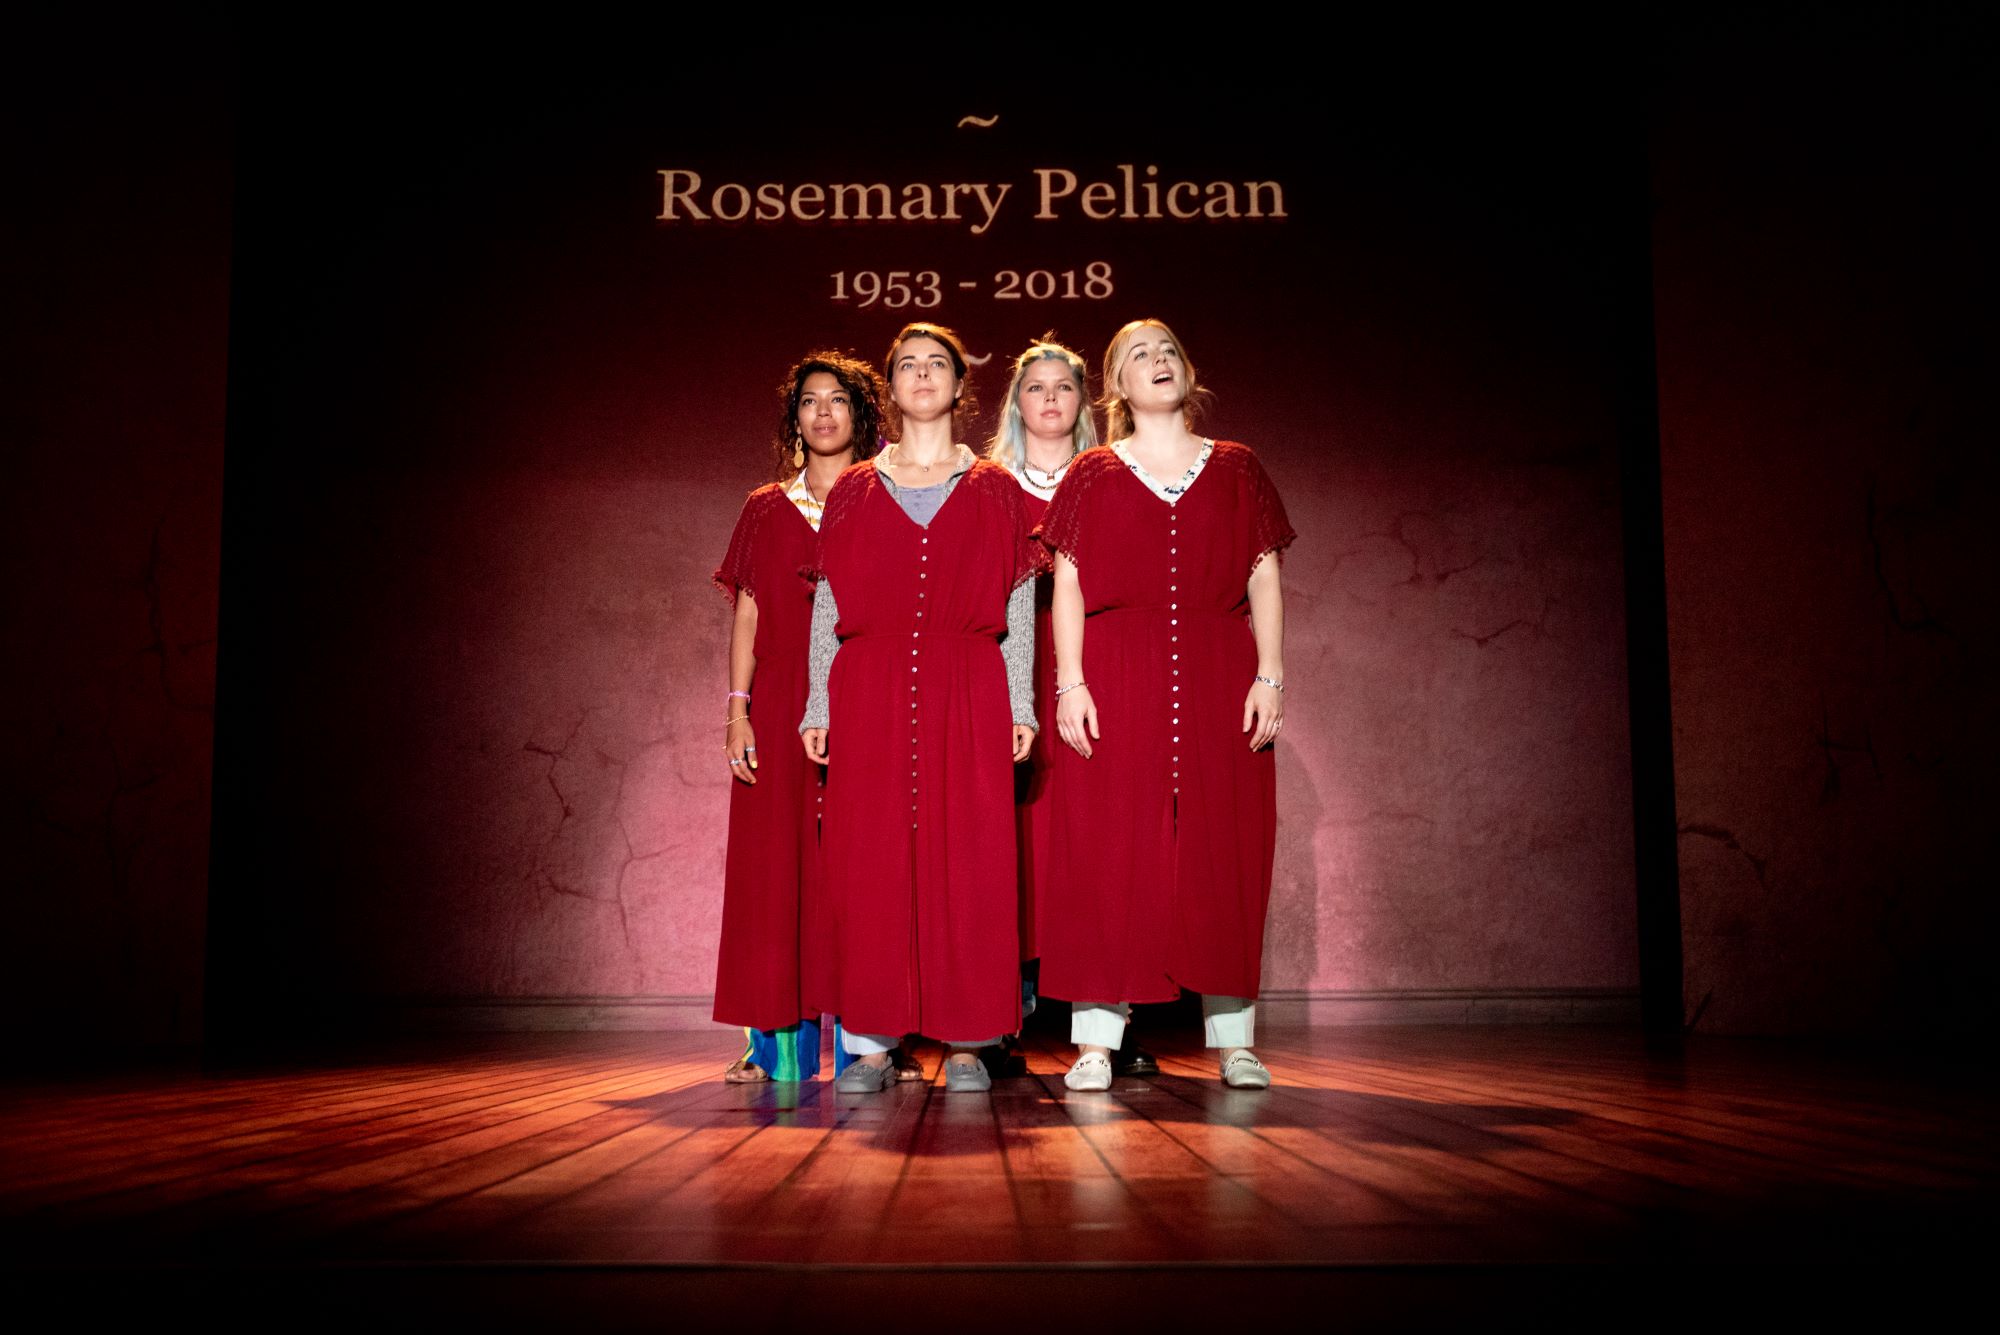 The four sisters stand in formation in red dresses, memorialising, while the text beamed behind them reads 